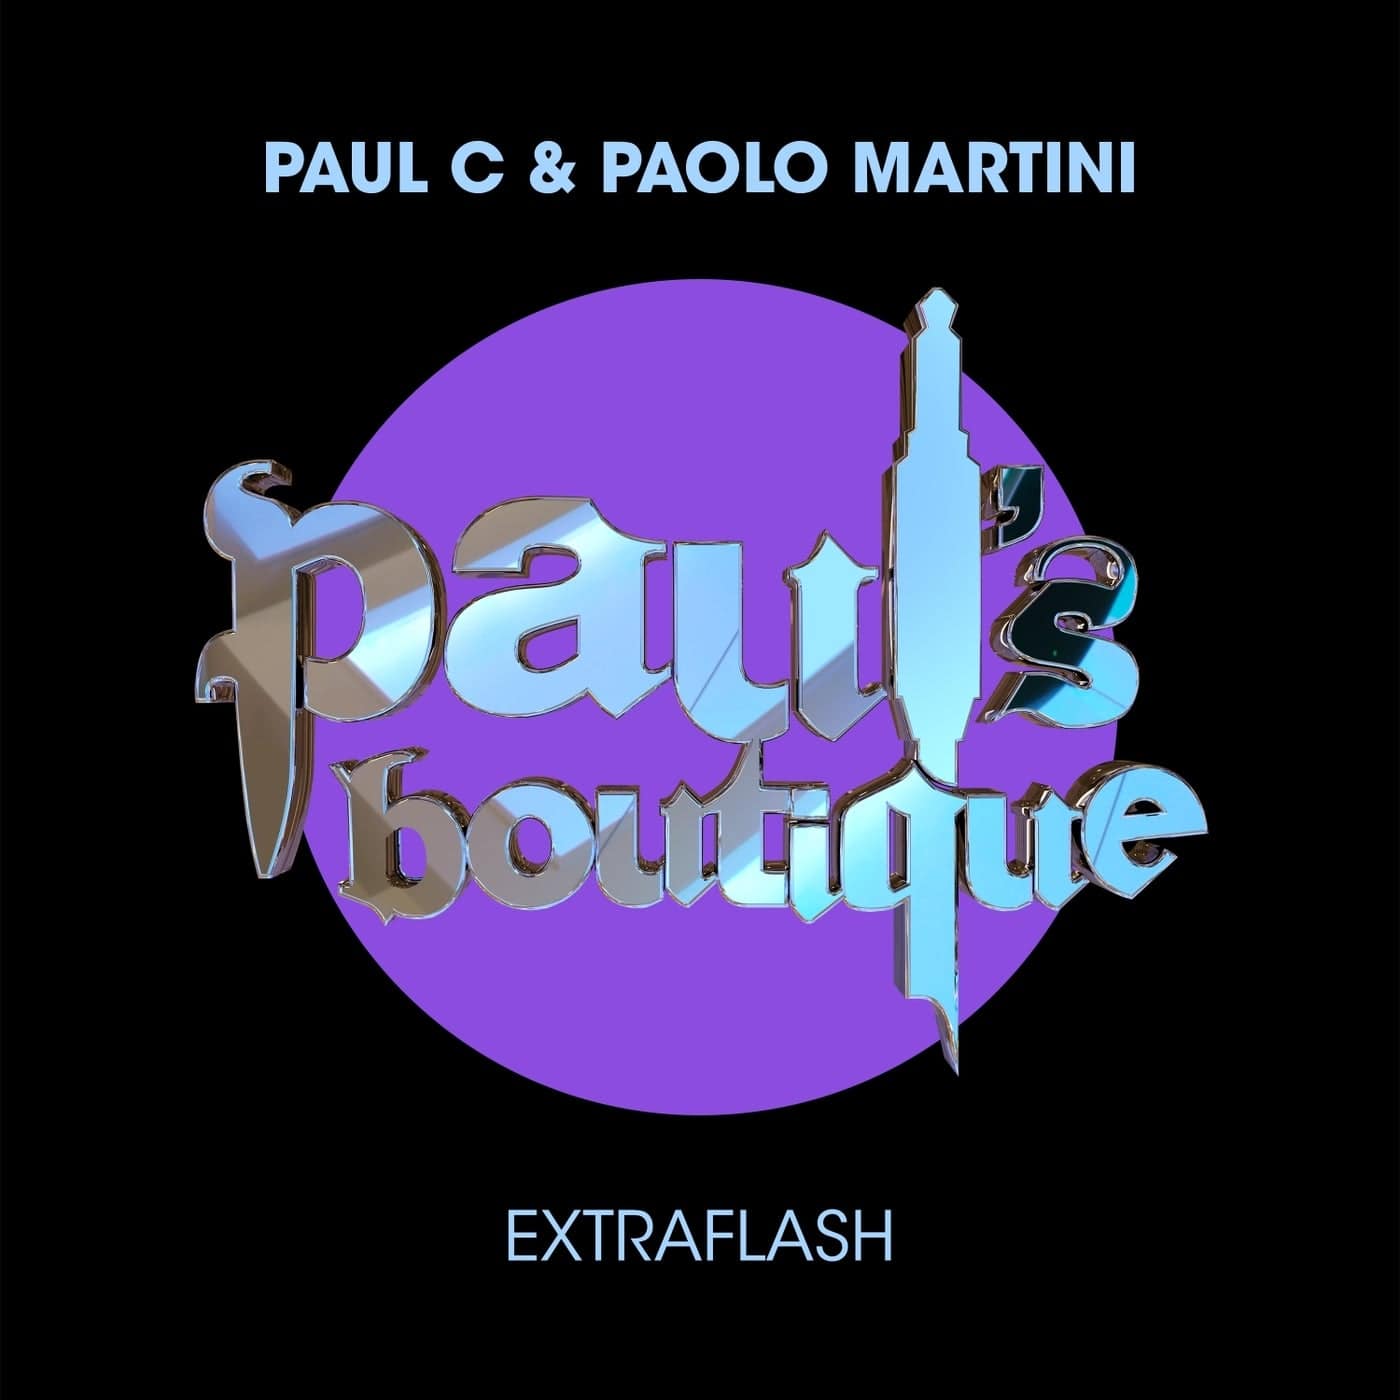 image cover: Extraflash by Paul C & Paolo Martini on Paul's Boutique